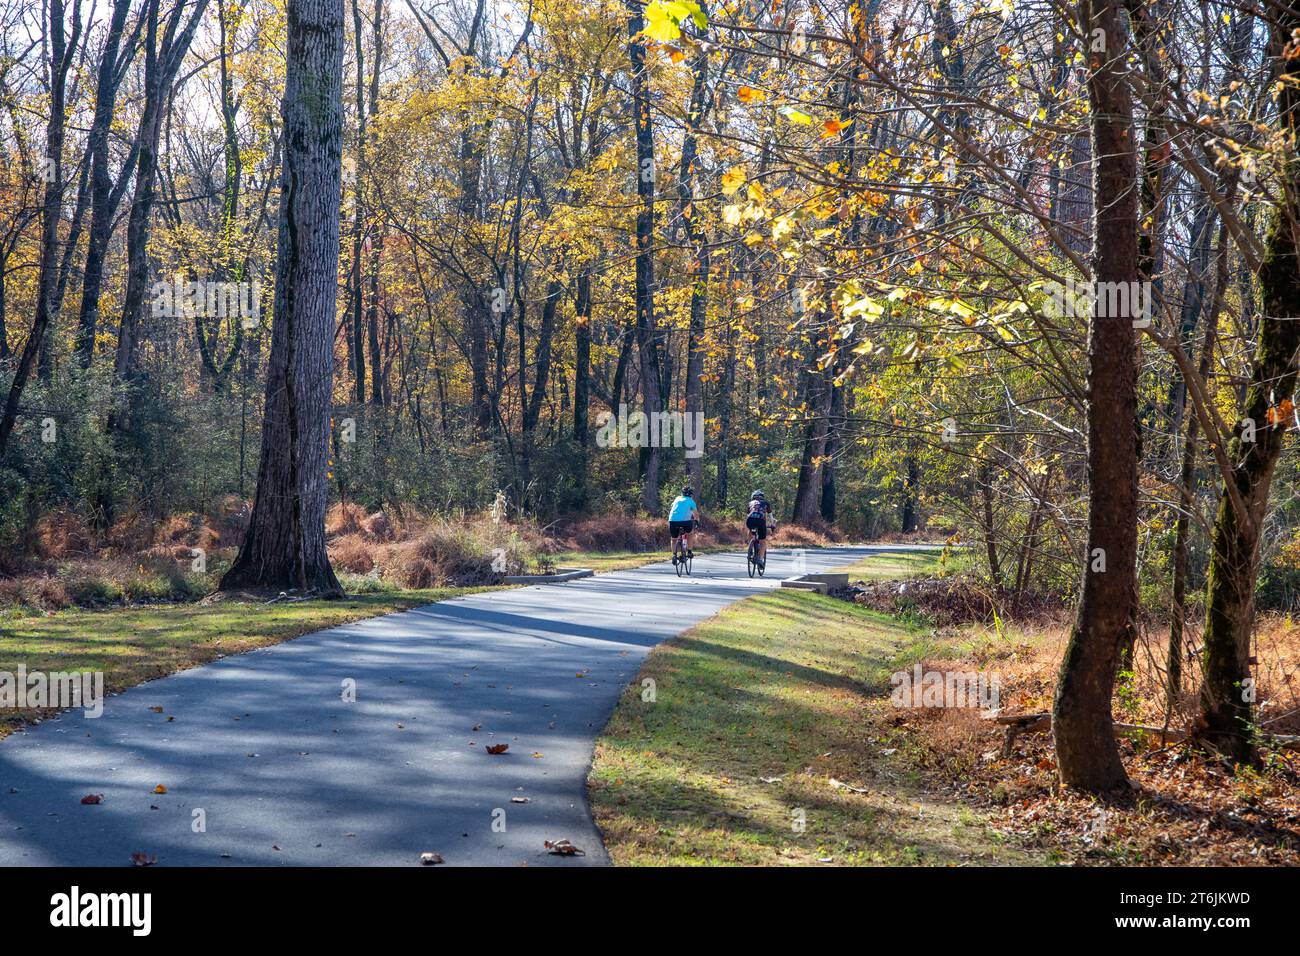 Two bicyclists riding on a paved path through a forest in fall. Stock Photo